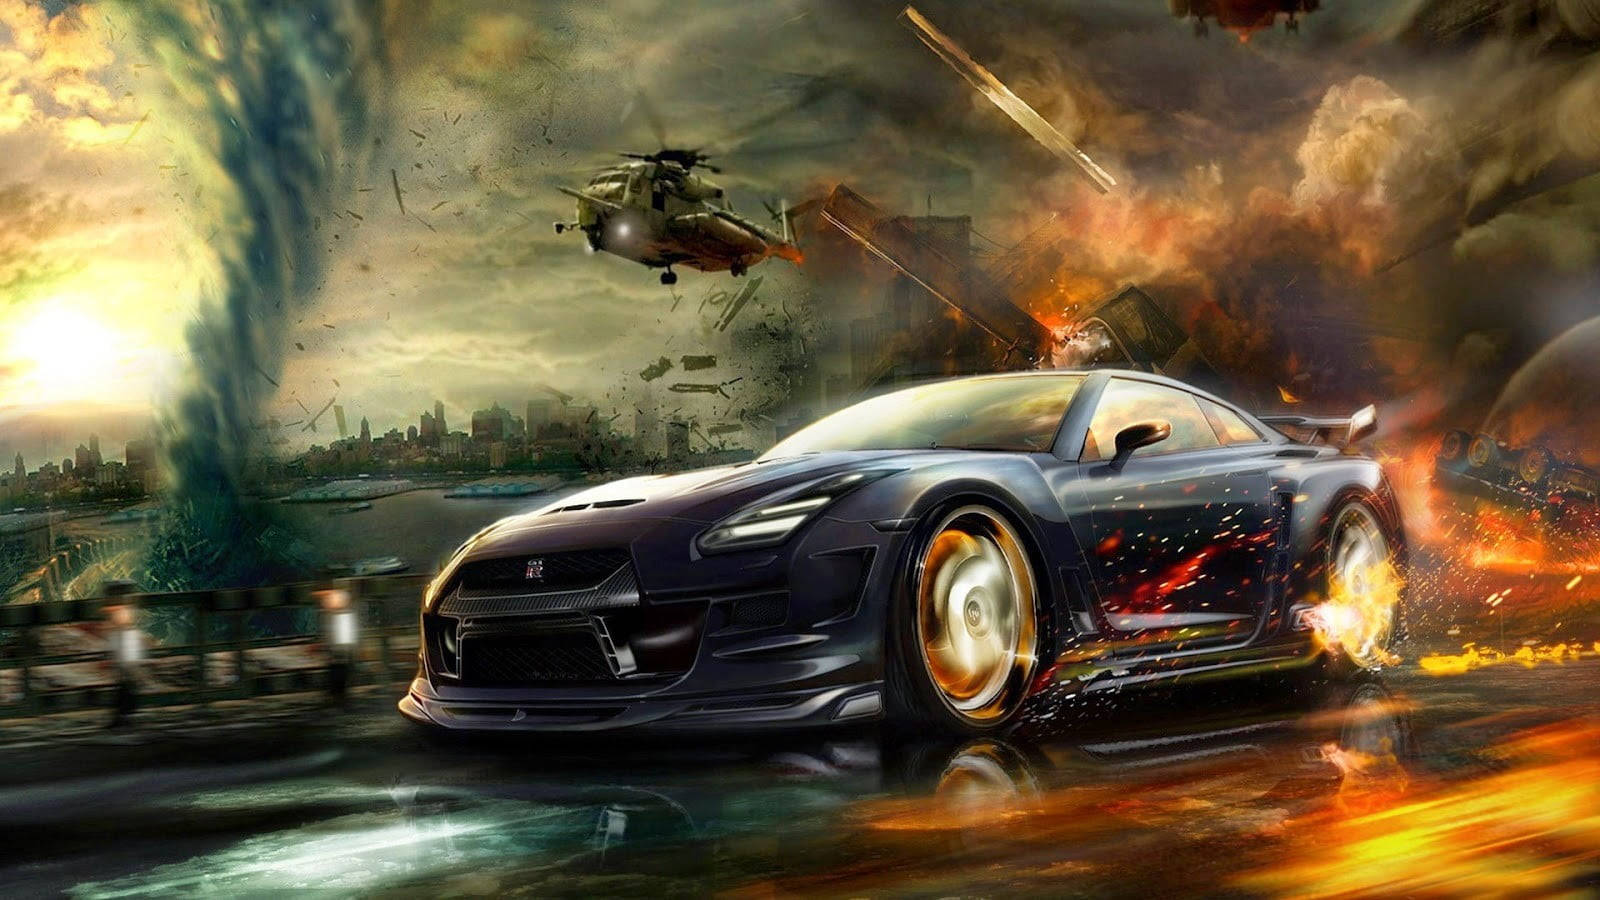 Fire Car Escaping Disaster Wallpaper